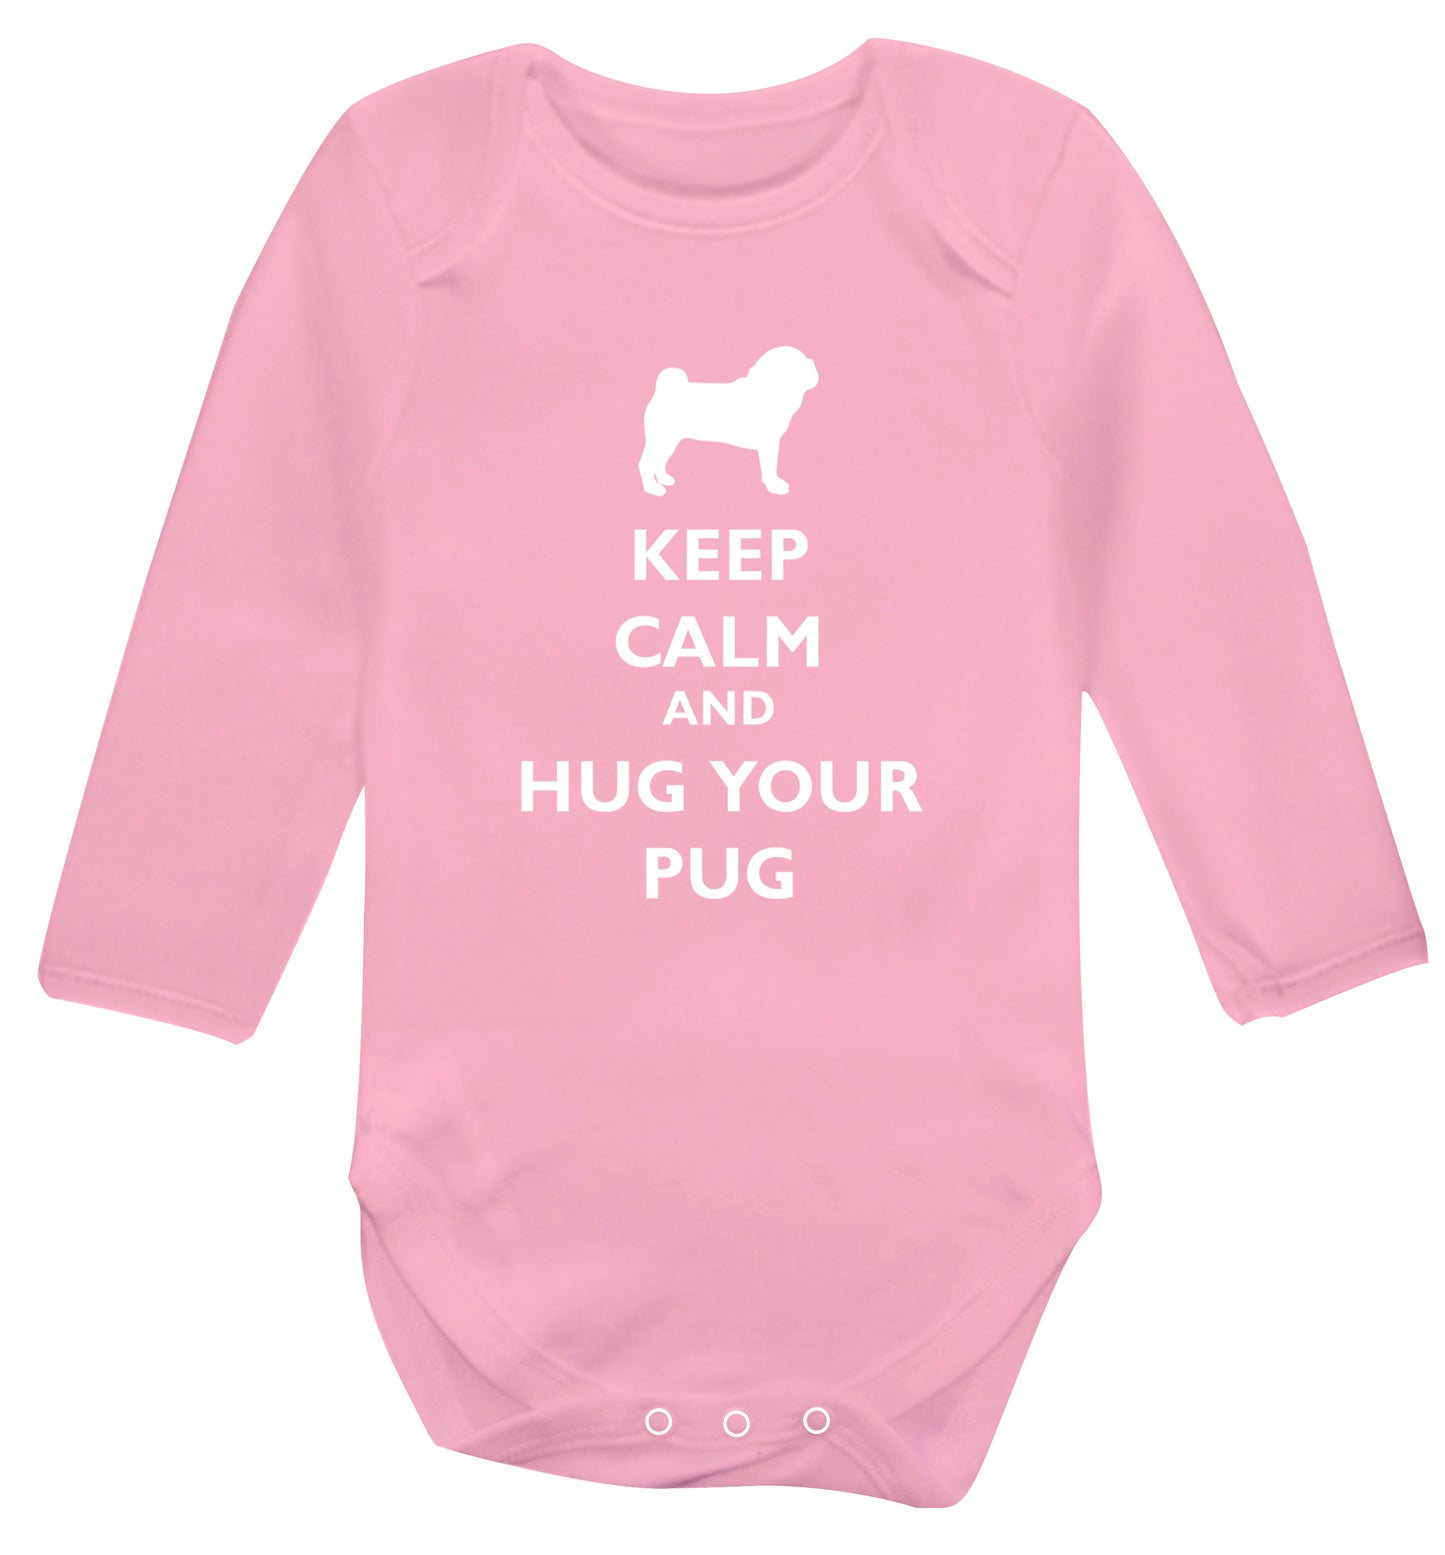 Keep calm and hug your pug Baby Vest long sleeved pale pink 6-12 months